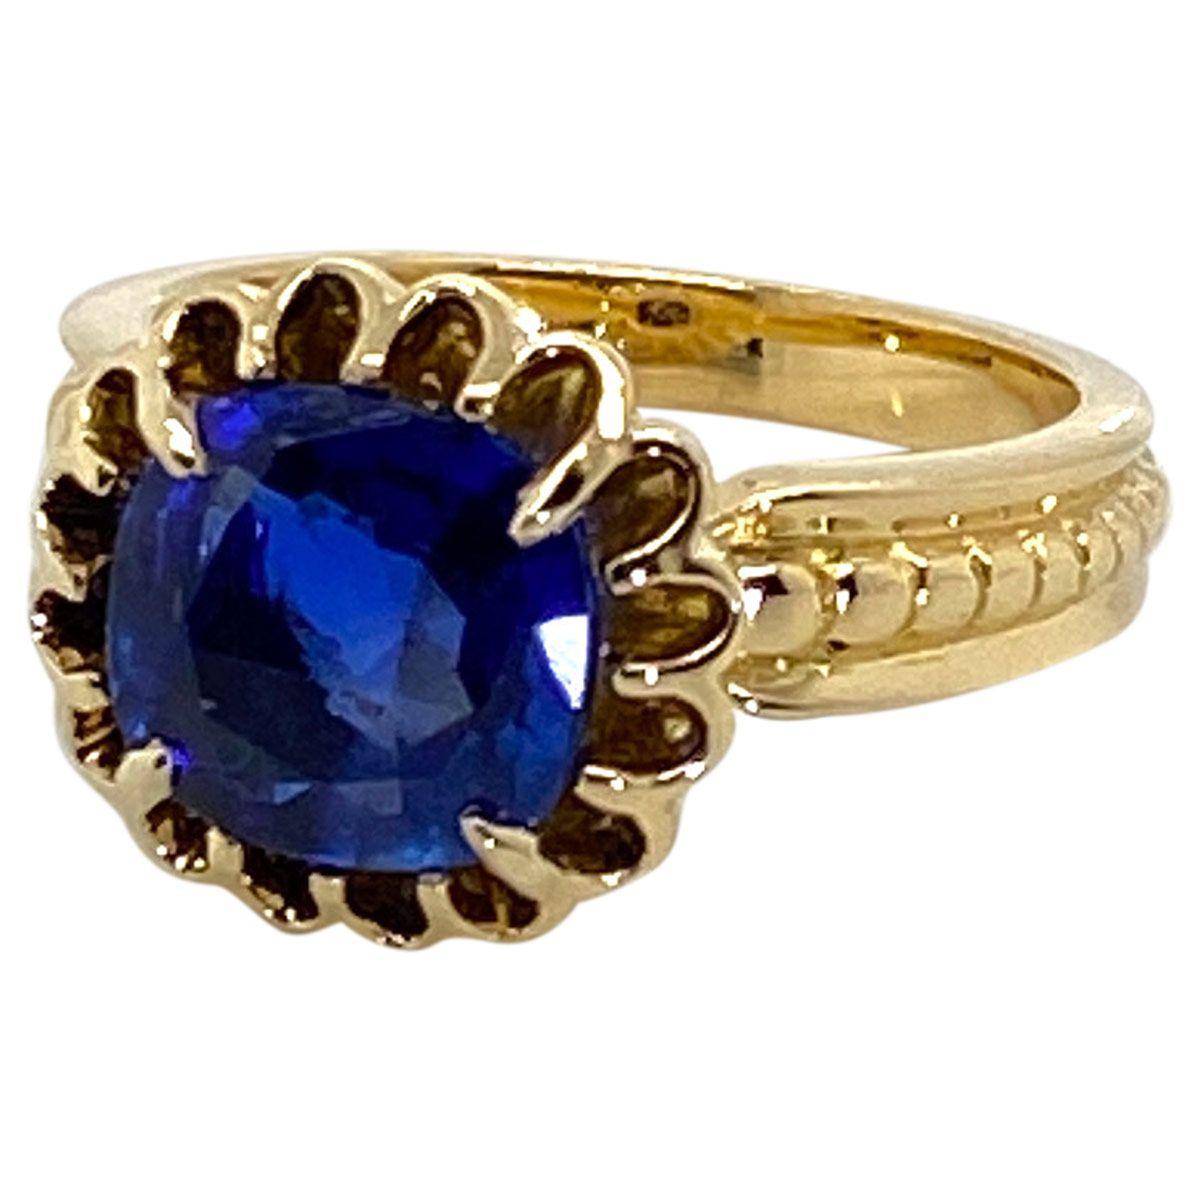 The combination of 18k yellow gold and this royal blue sapphire is what draws your attention to this beautiful ring.  Featuring a magnificent 2.82ct certified unheated Burma (Myanmar) blue sapphire with a depth and intensity that only can be